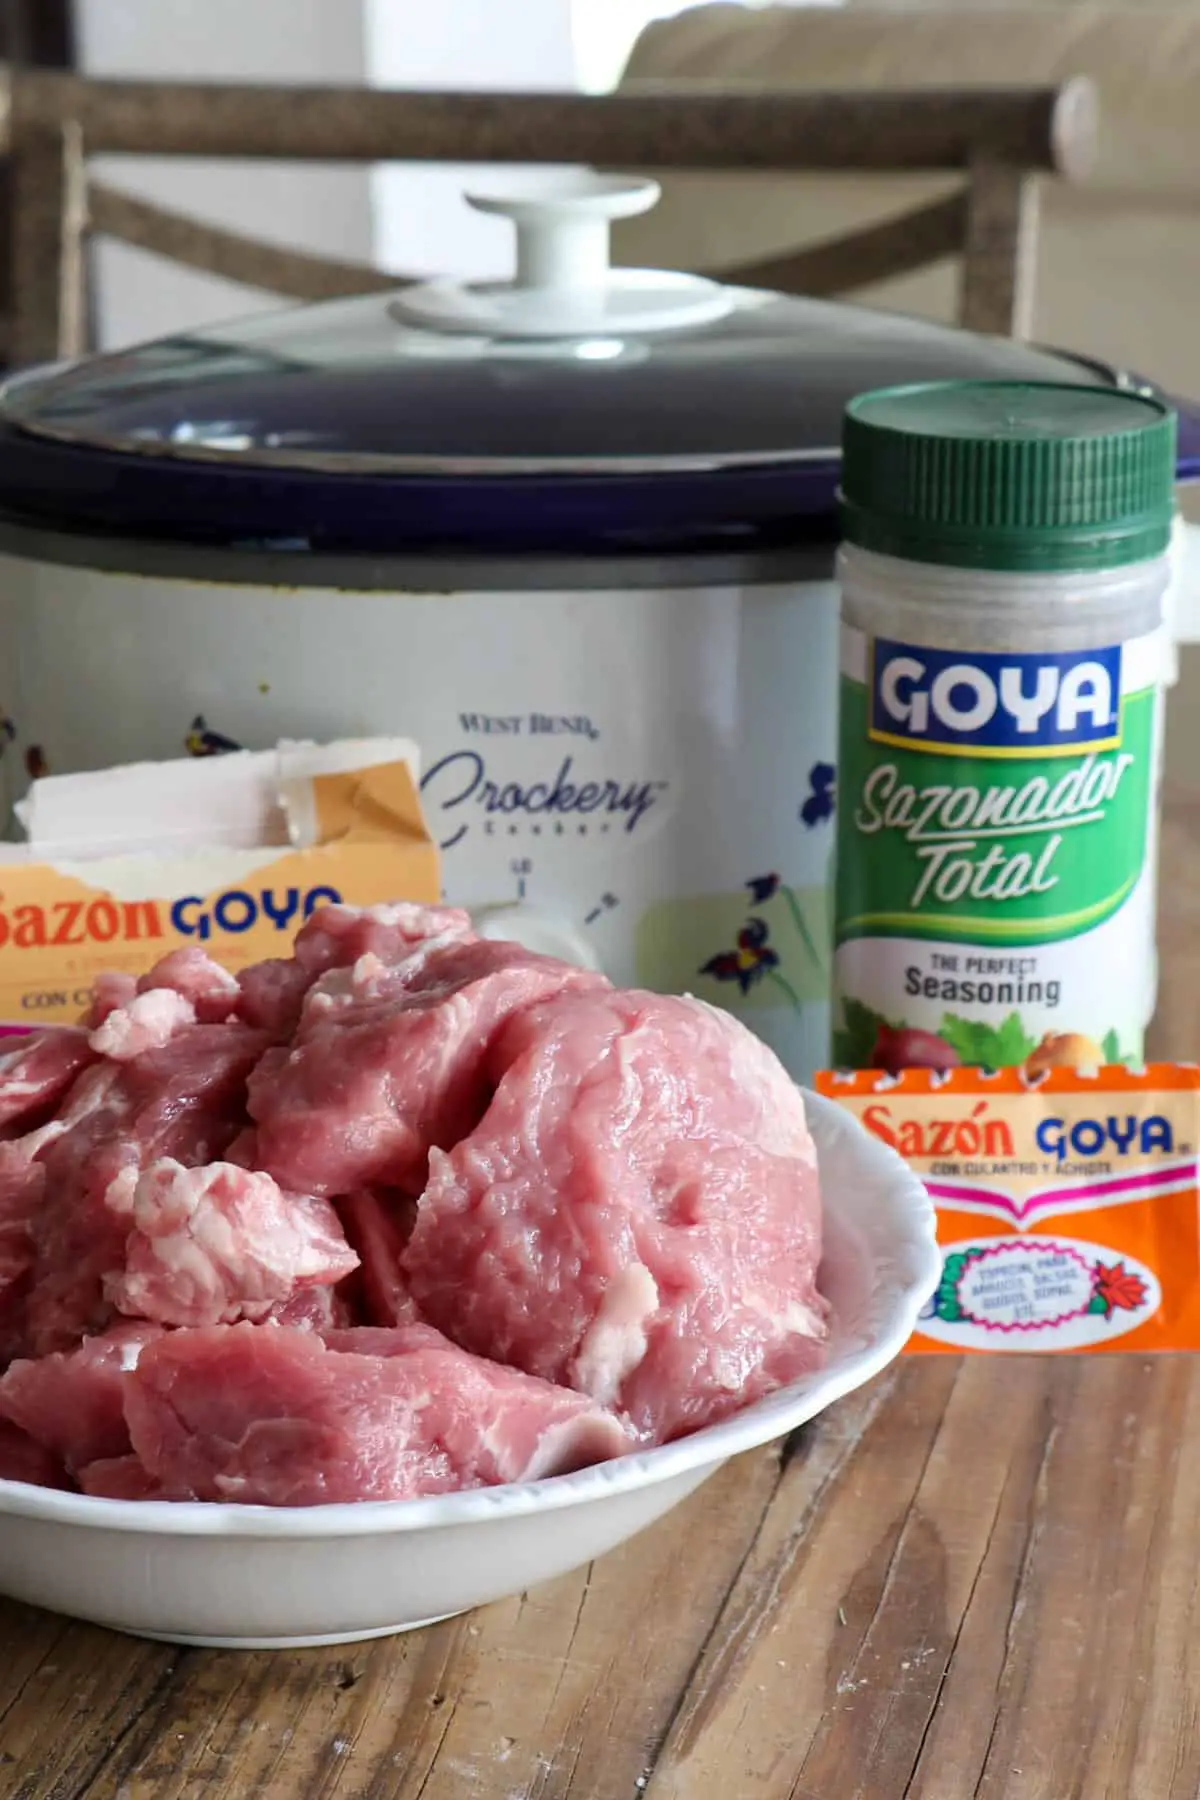 A crockpot, a white bowl filled with uncooked pork meat cuts, a box of Sazon Goya and packet of Sazon Goya Seasoning, and bottle of Goya Sazonador Total seasoning.